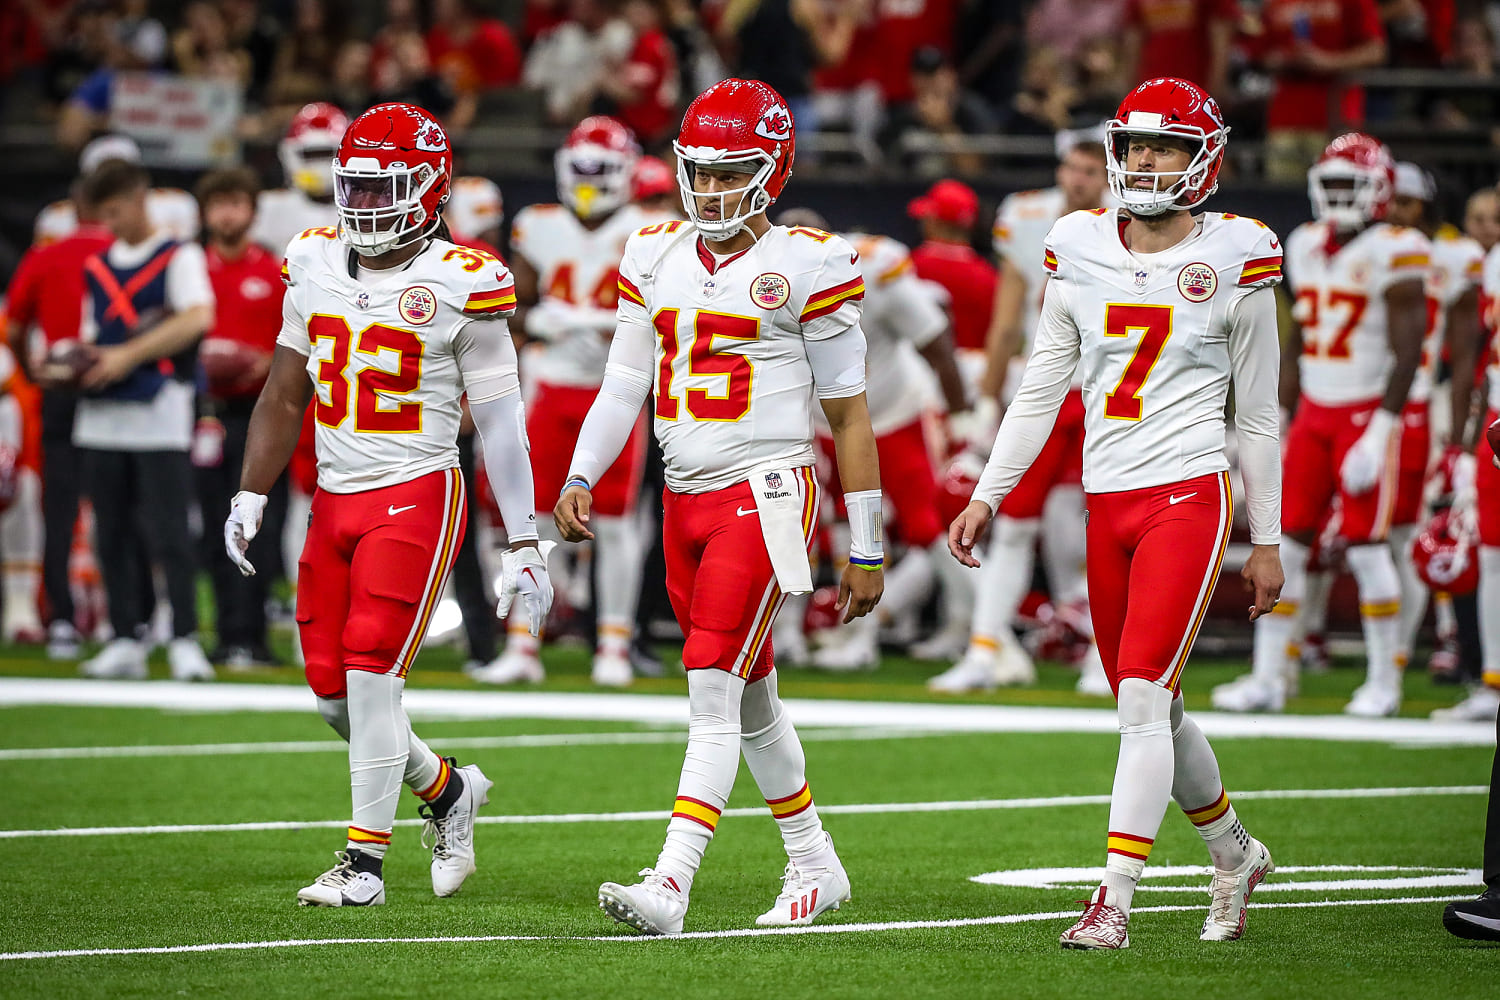 Patrick Mahomes says he doesn't agree with things Harrison Butker said, but calls him 'great person'